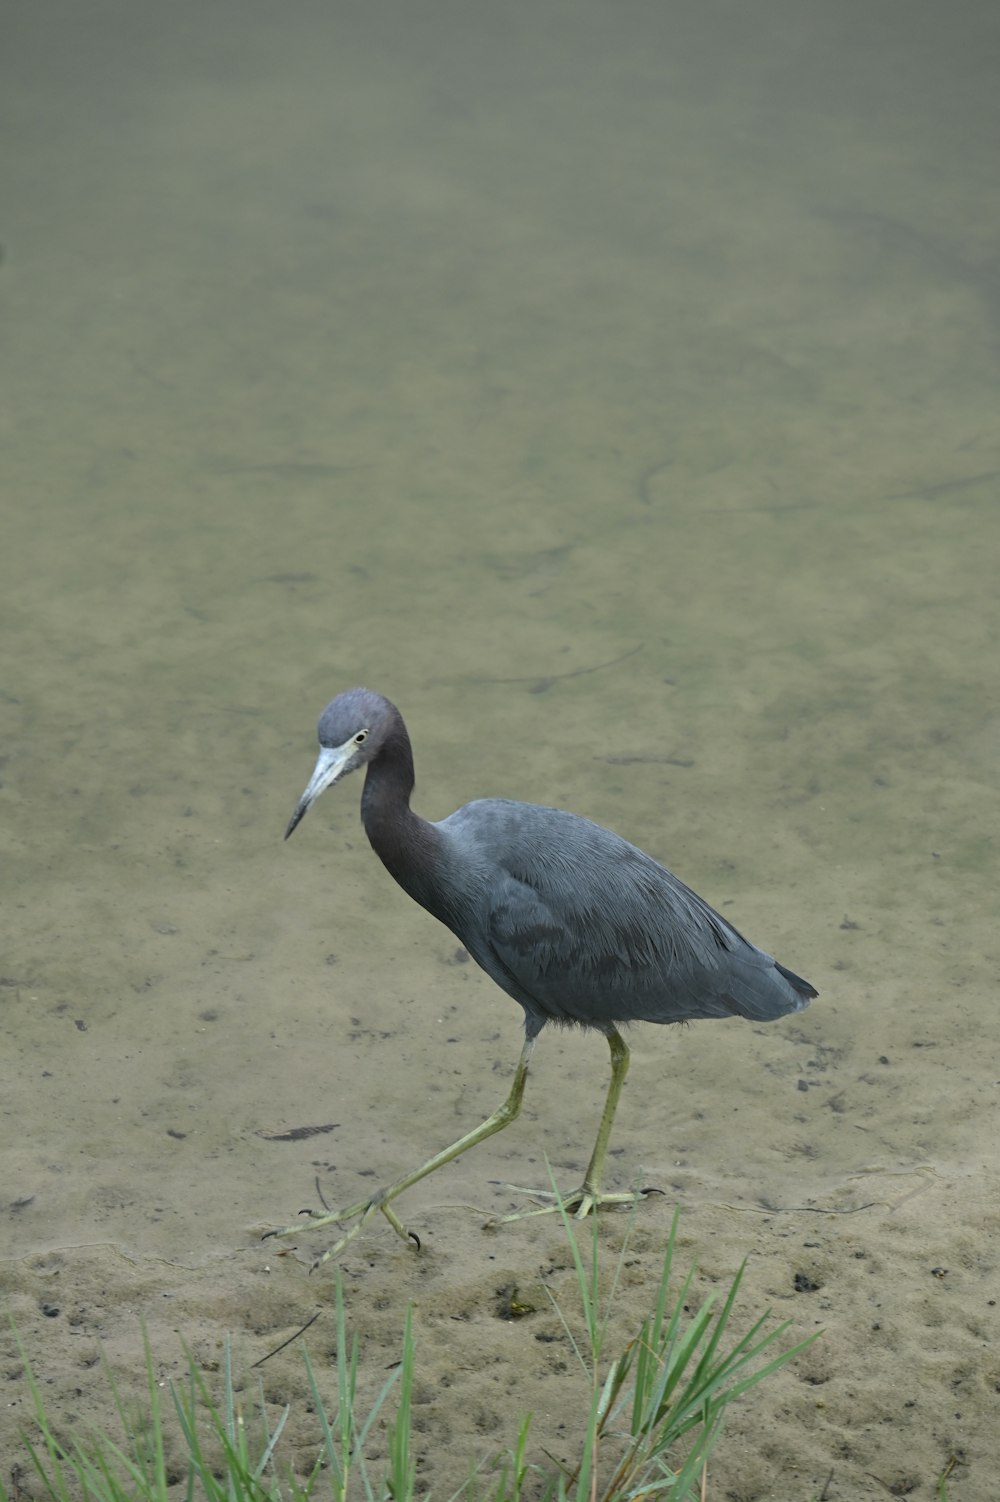 a bird with a long beak standing in shallow water